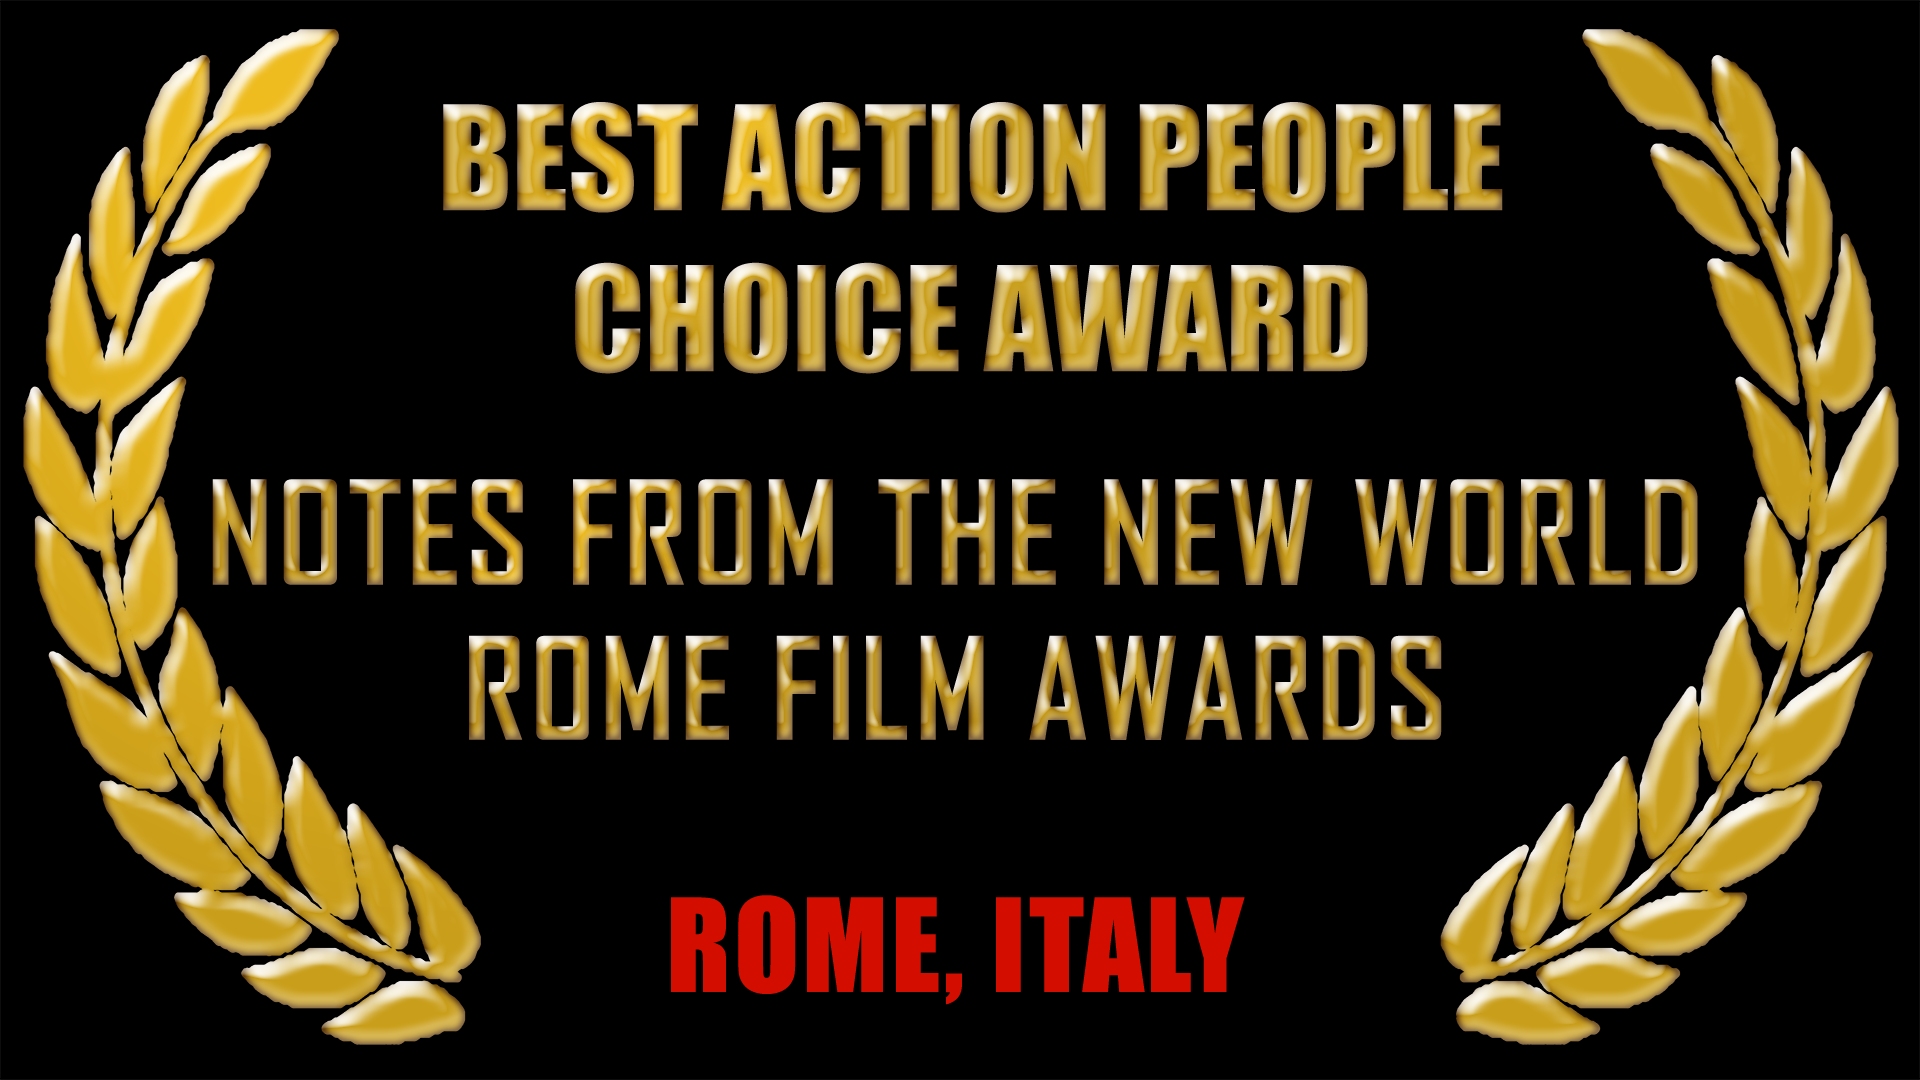 Best Action People Choice Award, Rome, Italy